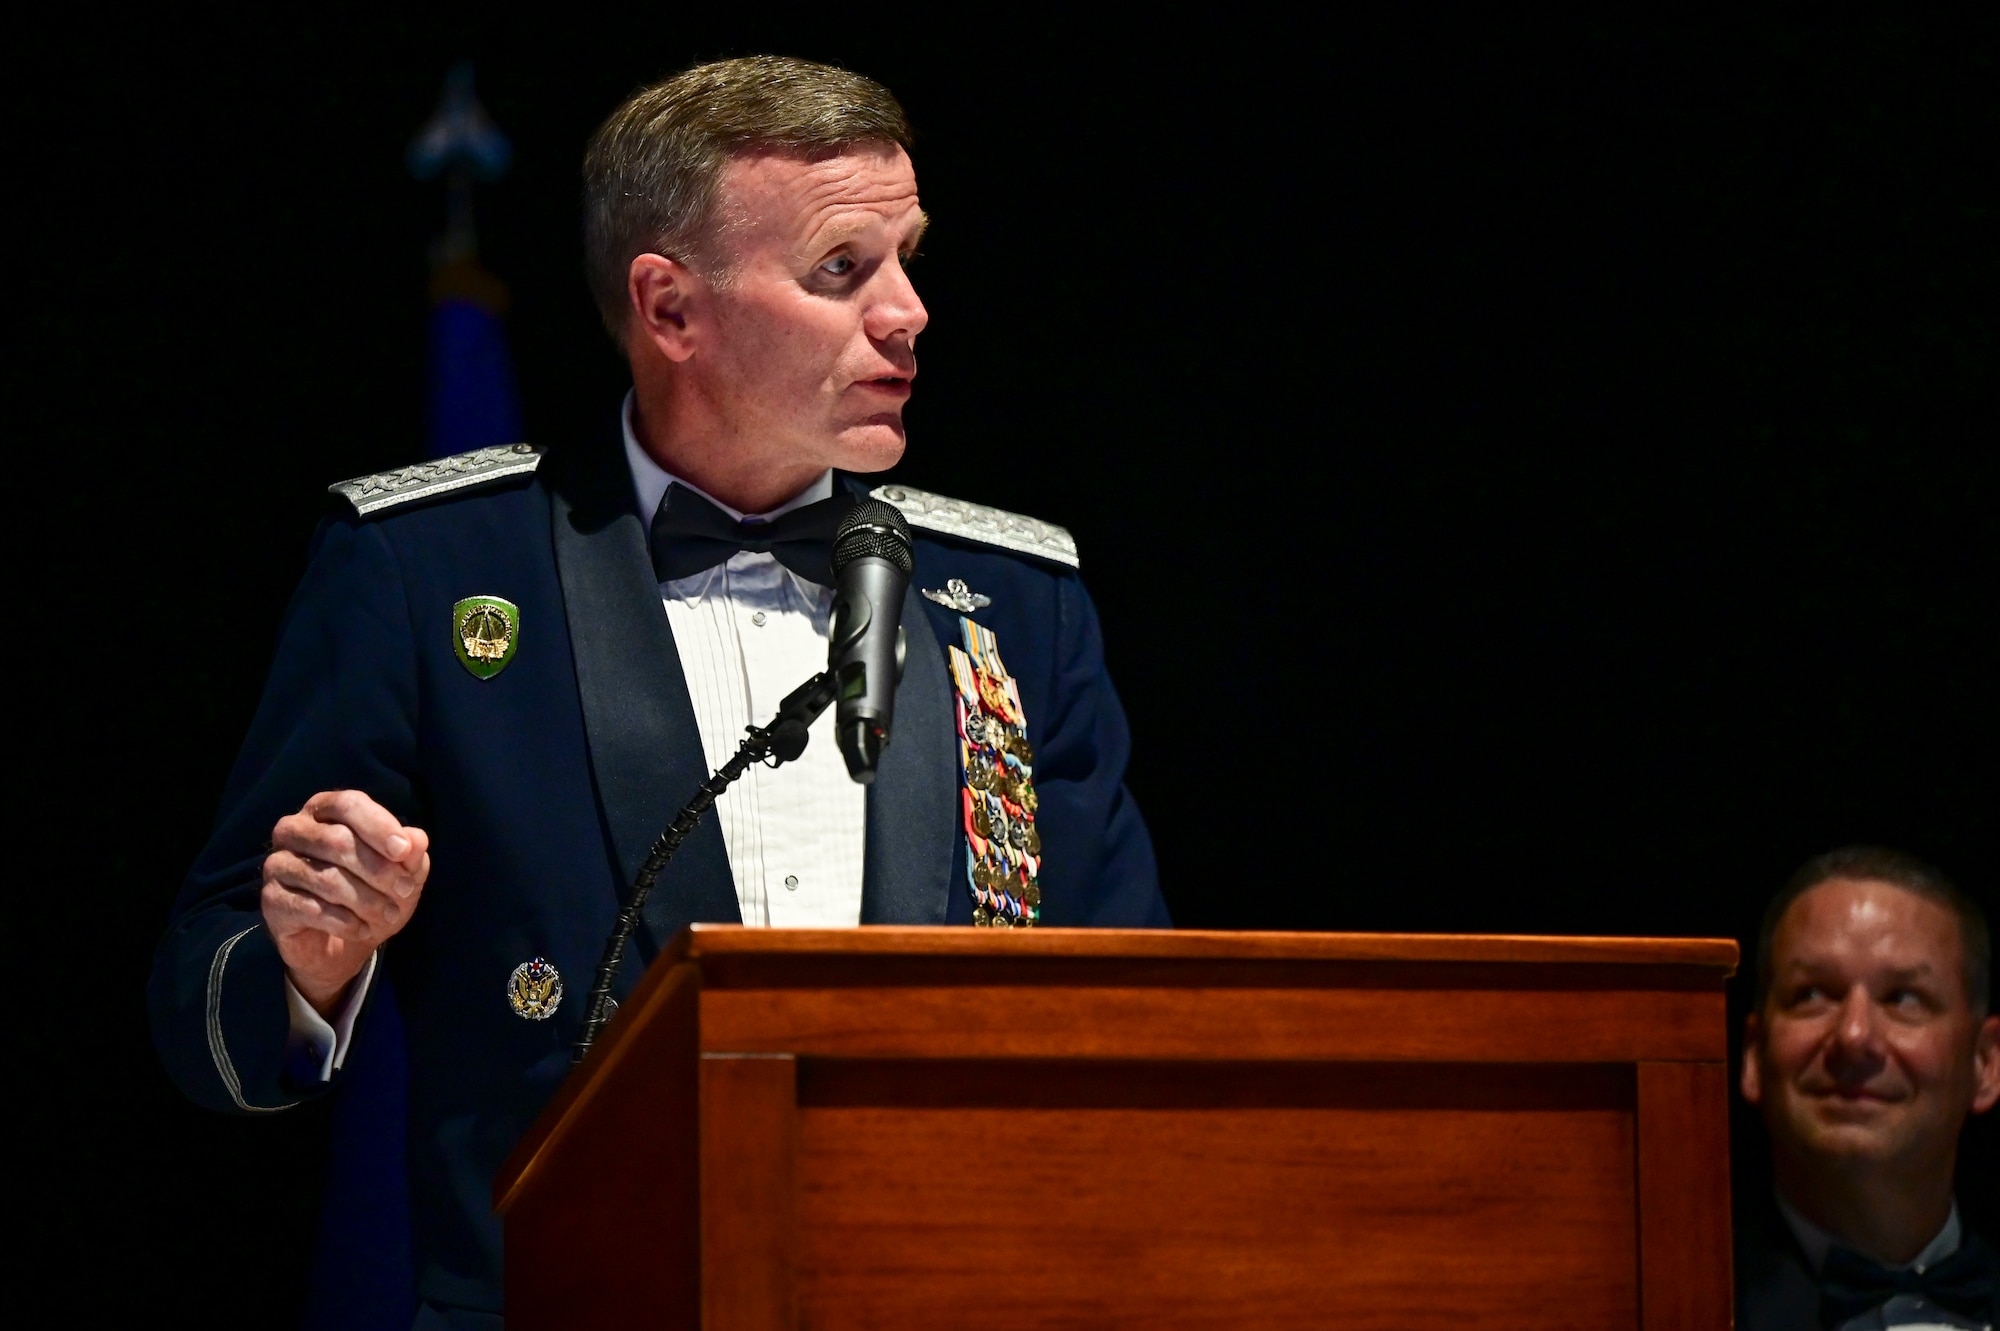 A uniformed man gesticulates while standing at a podium.